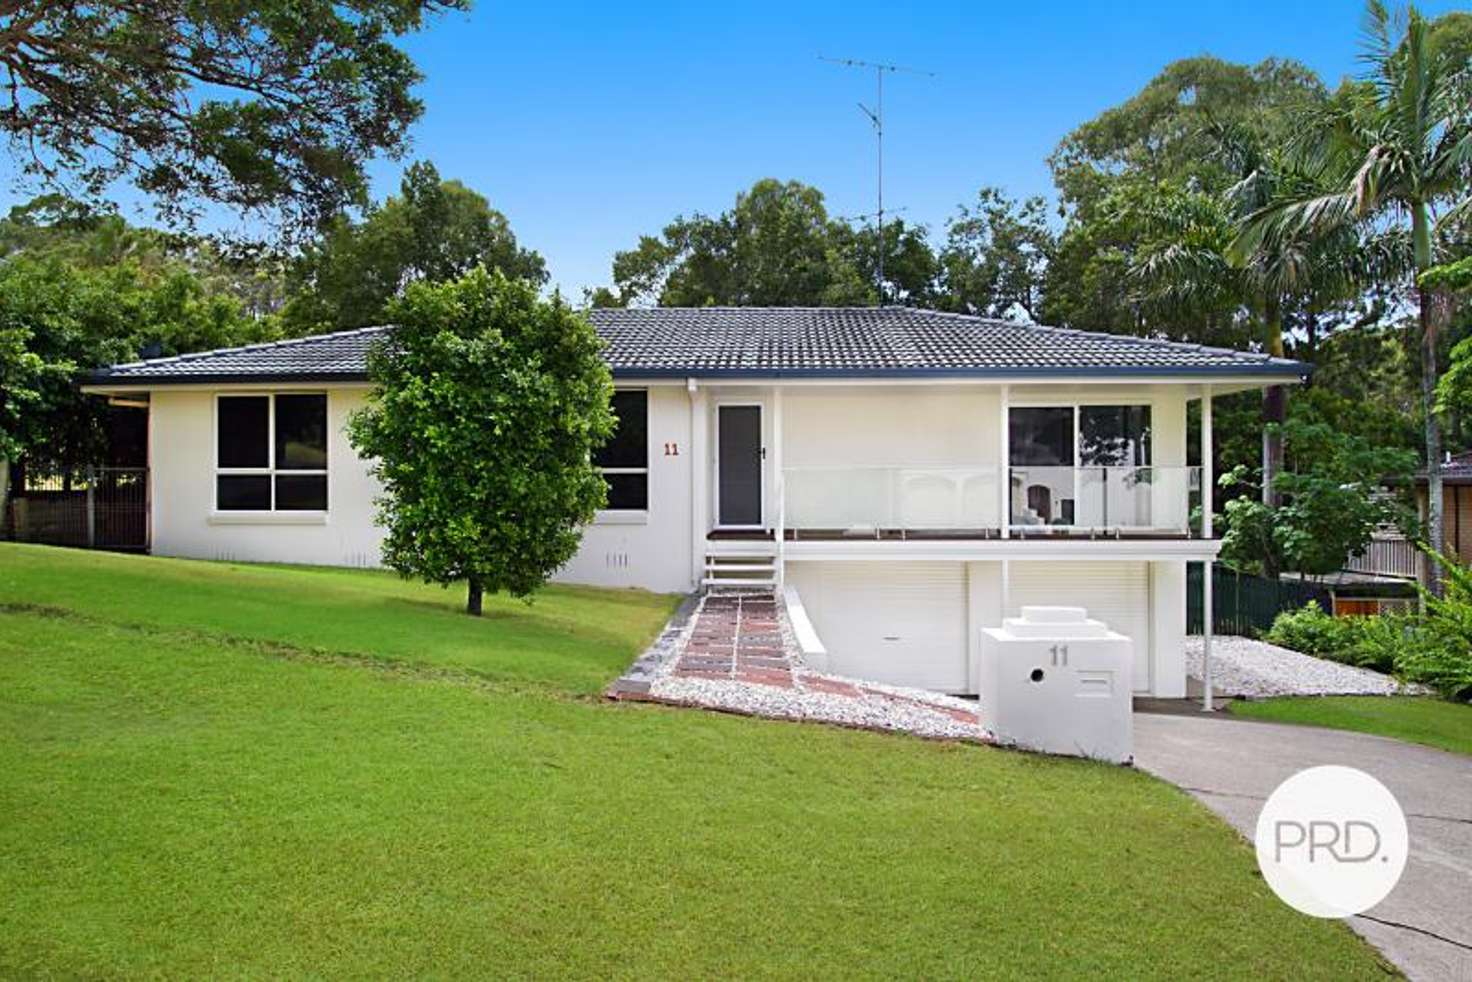 Main view of Homely house listing, 11 Boree Street, Ashmore QLD 4214